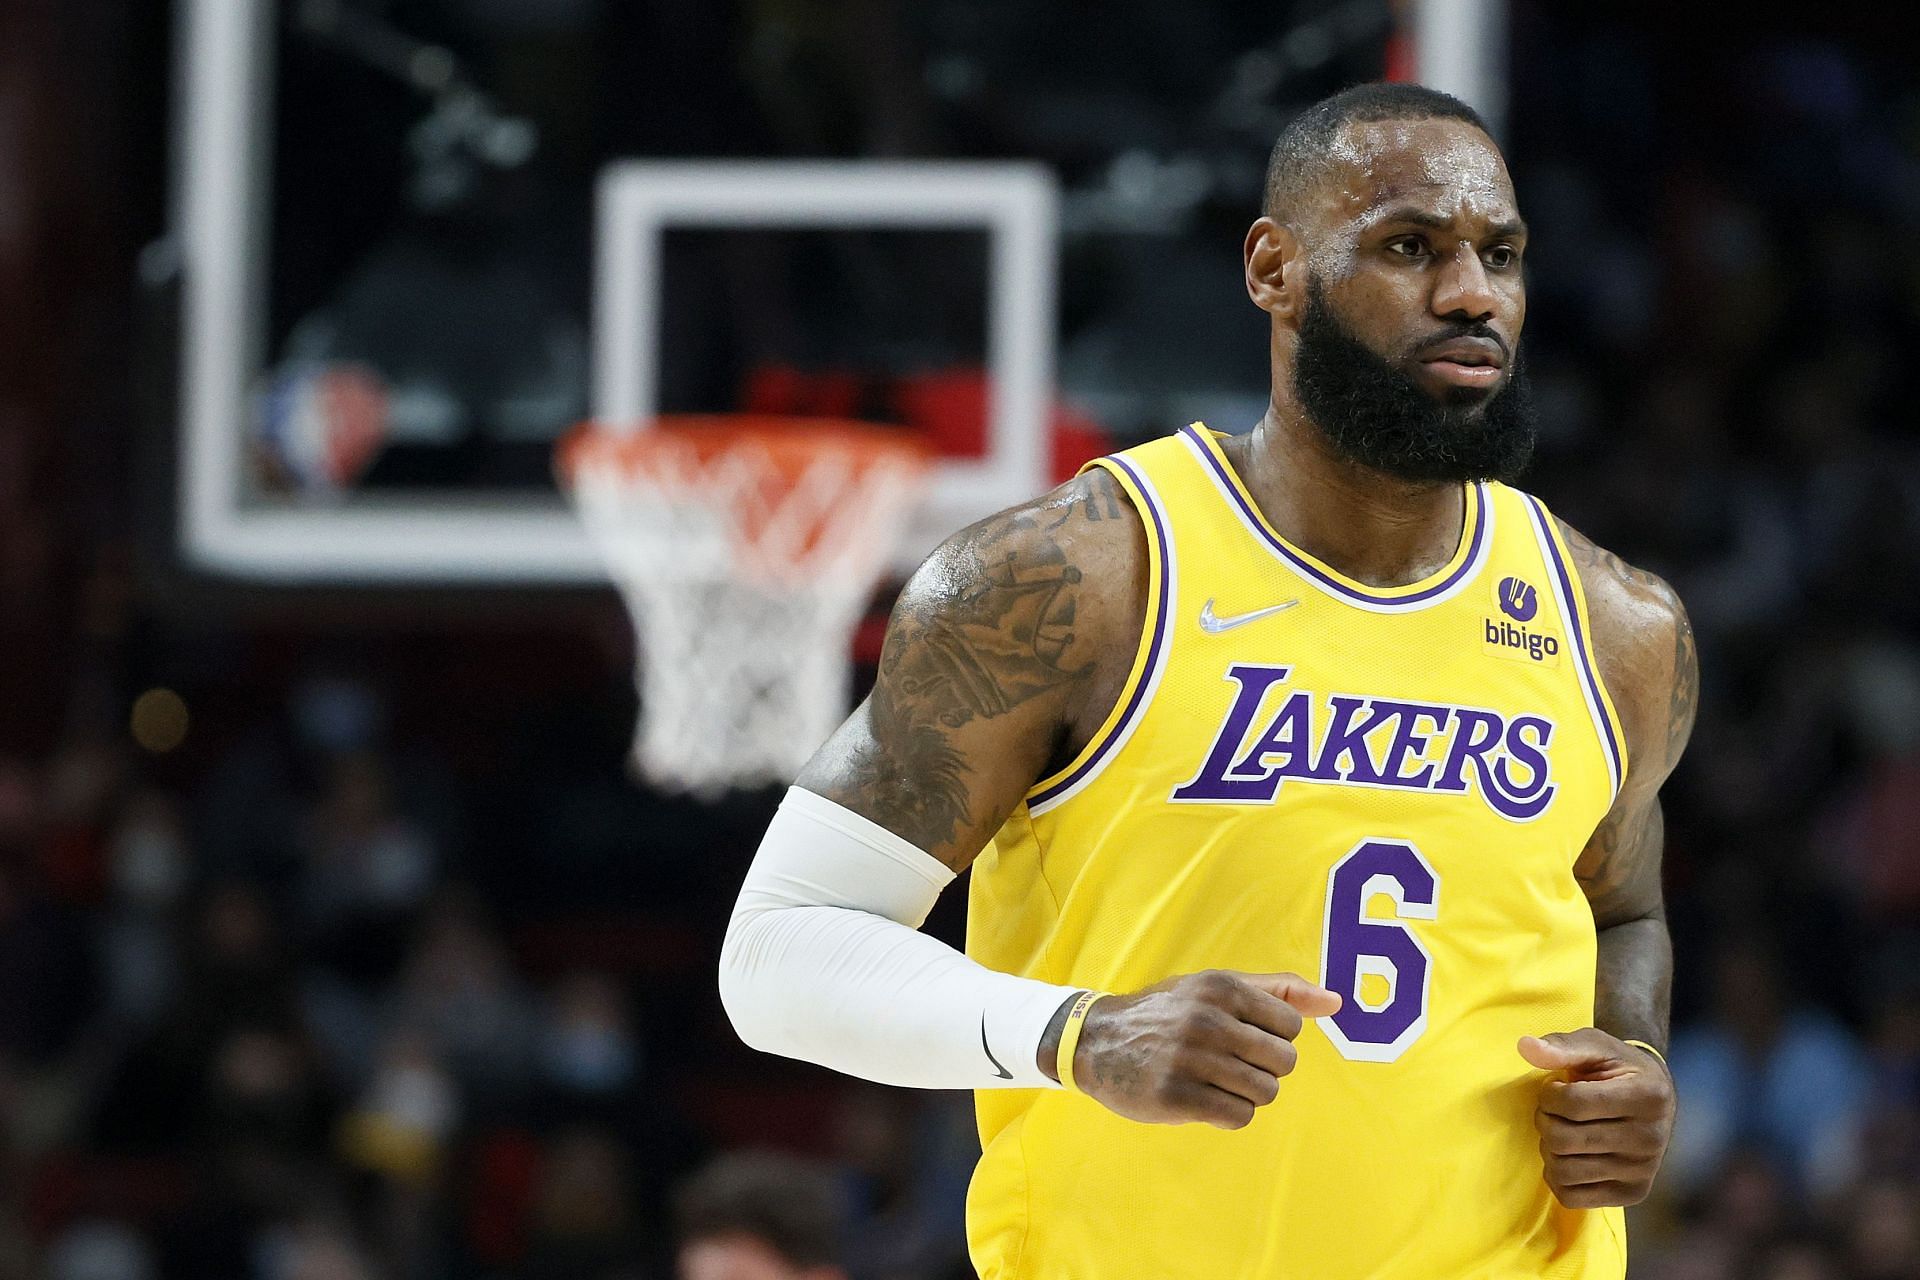 LeBron James&#039; LA Lakers suffered an embarrassing loss to the Portland Trail Blazers on Wednesday